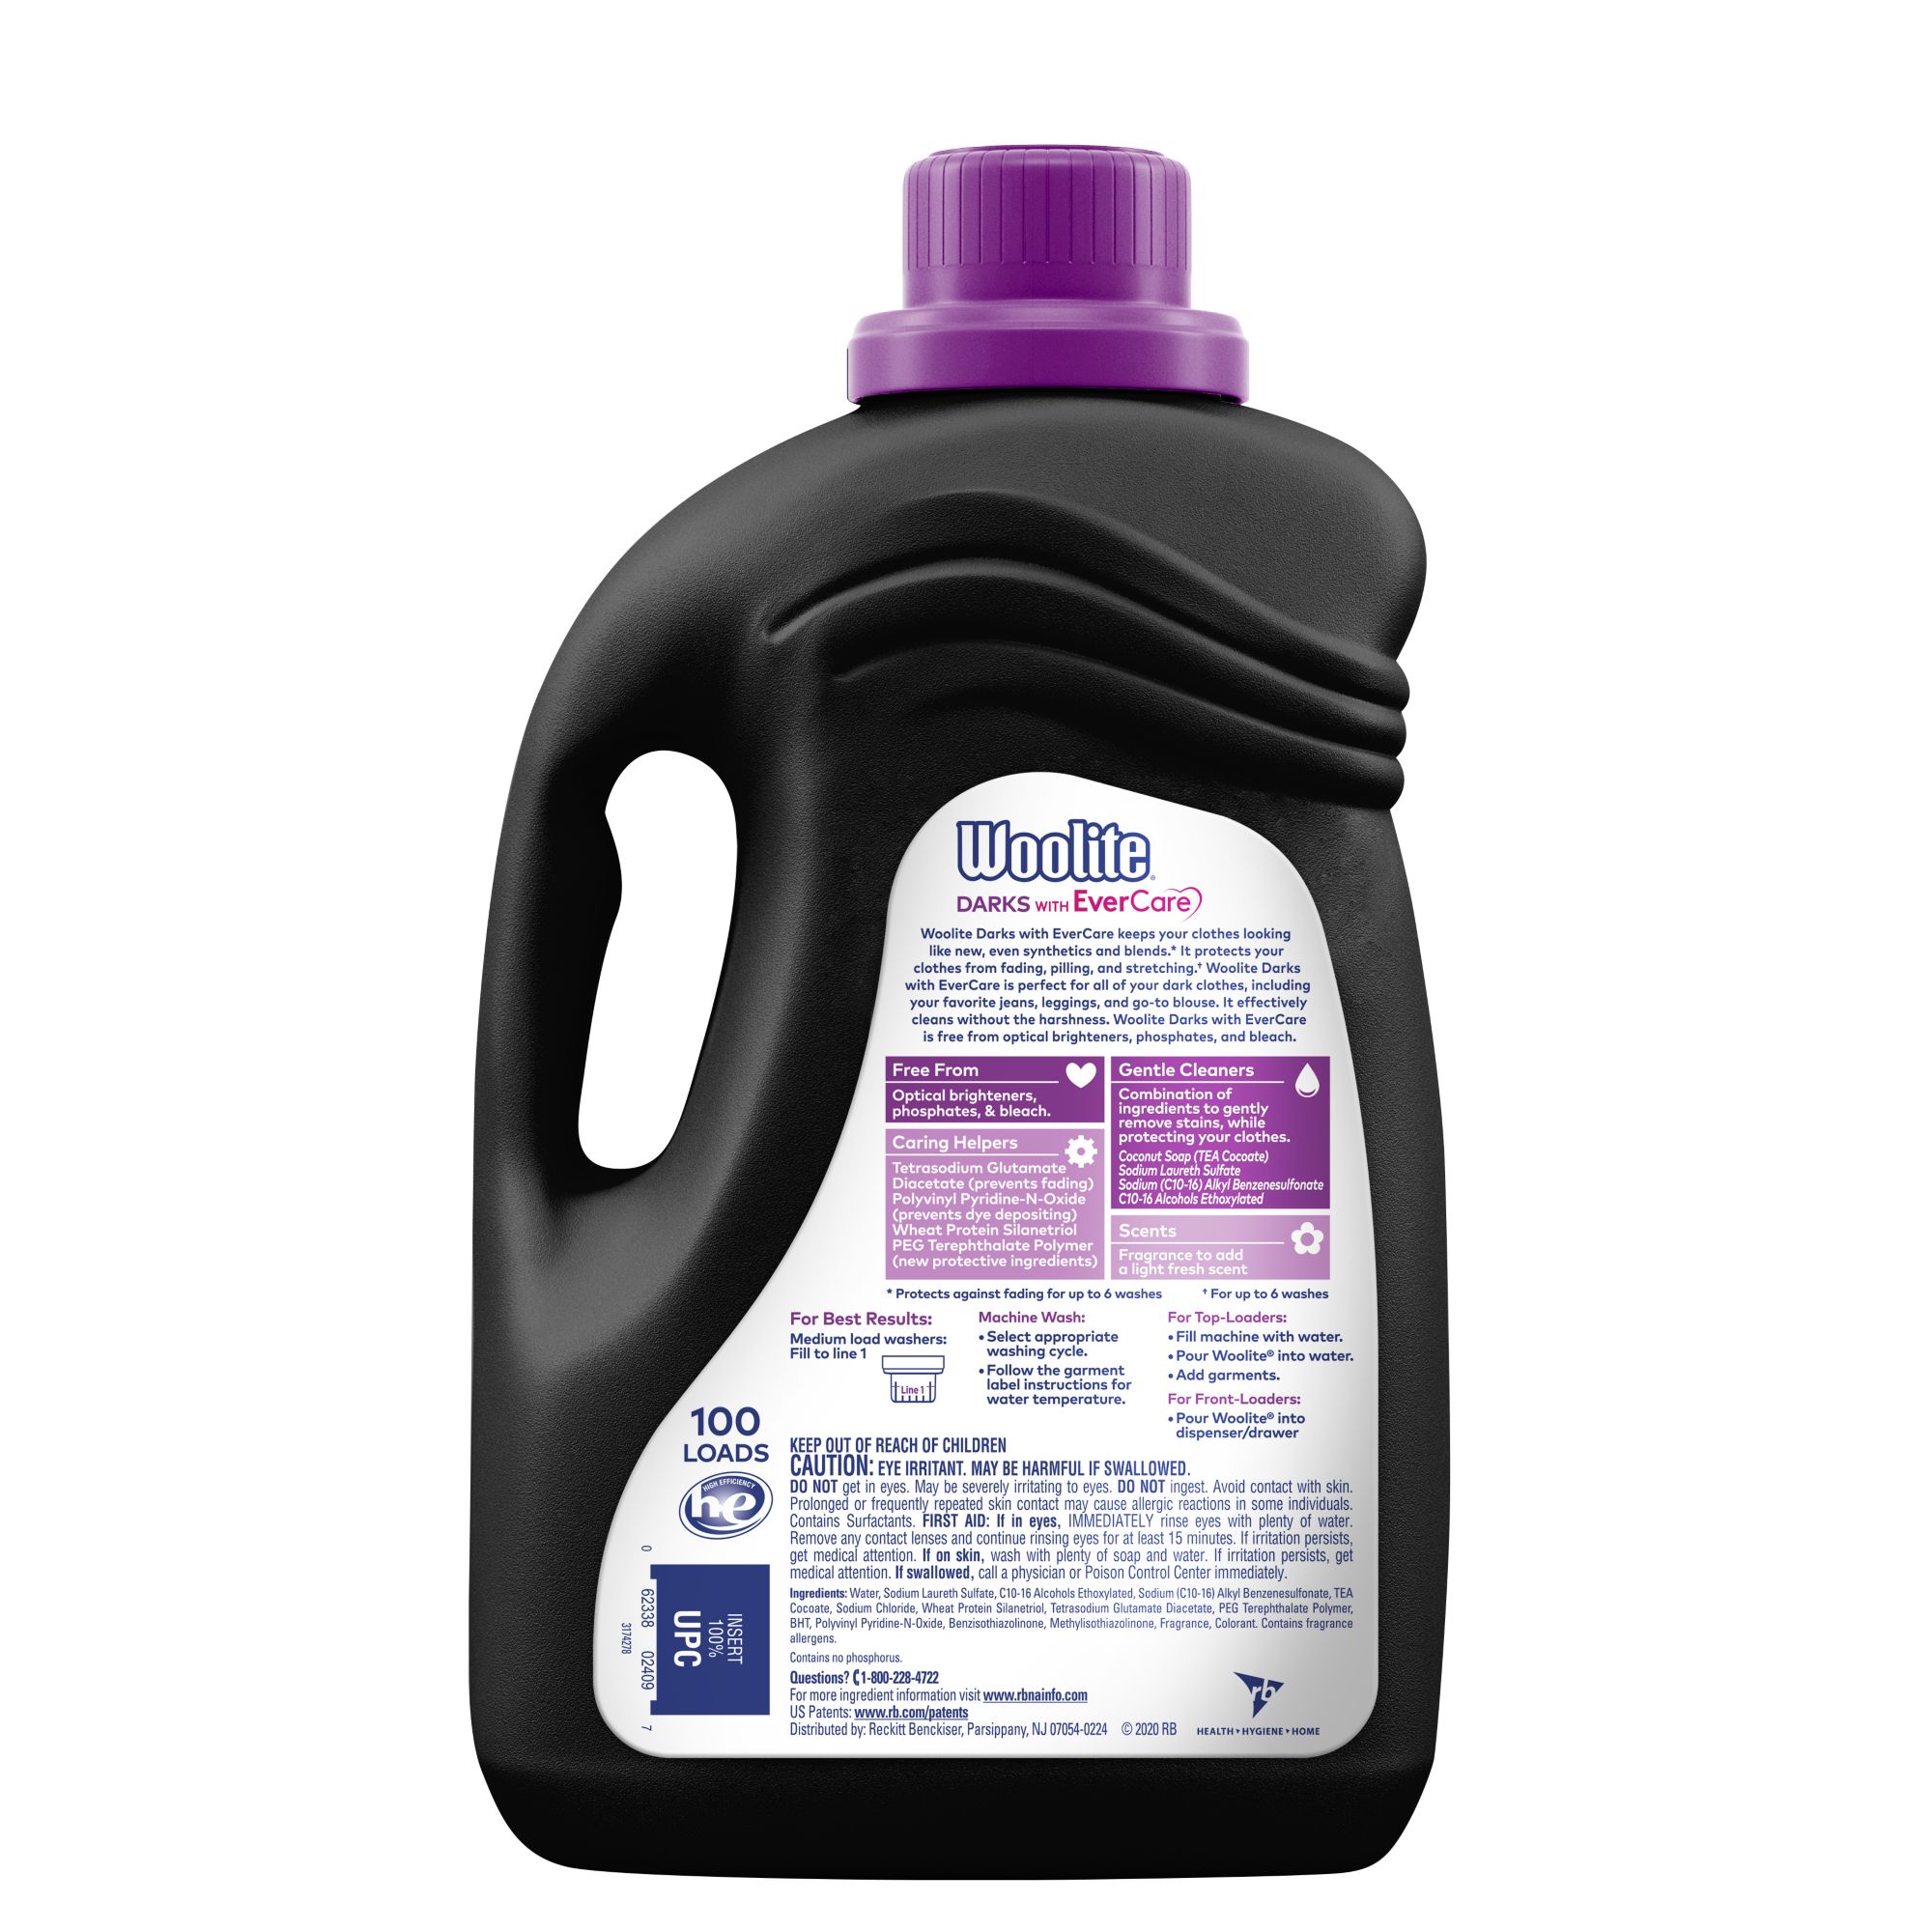 Woolite Laundry Detergent Review